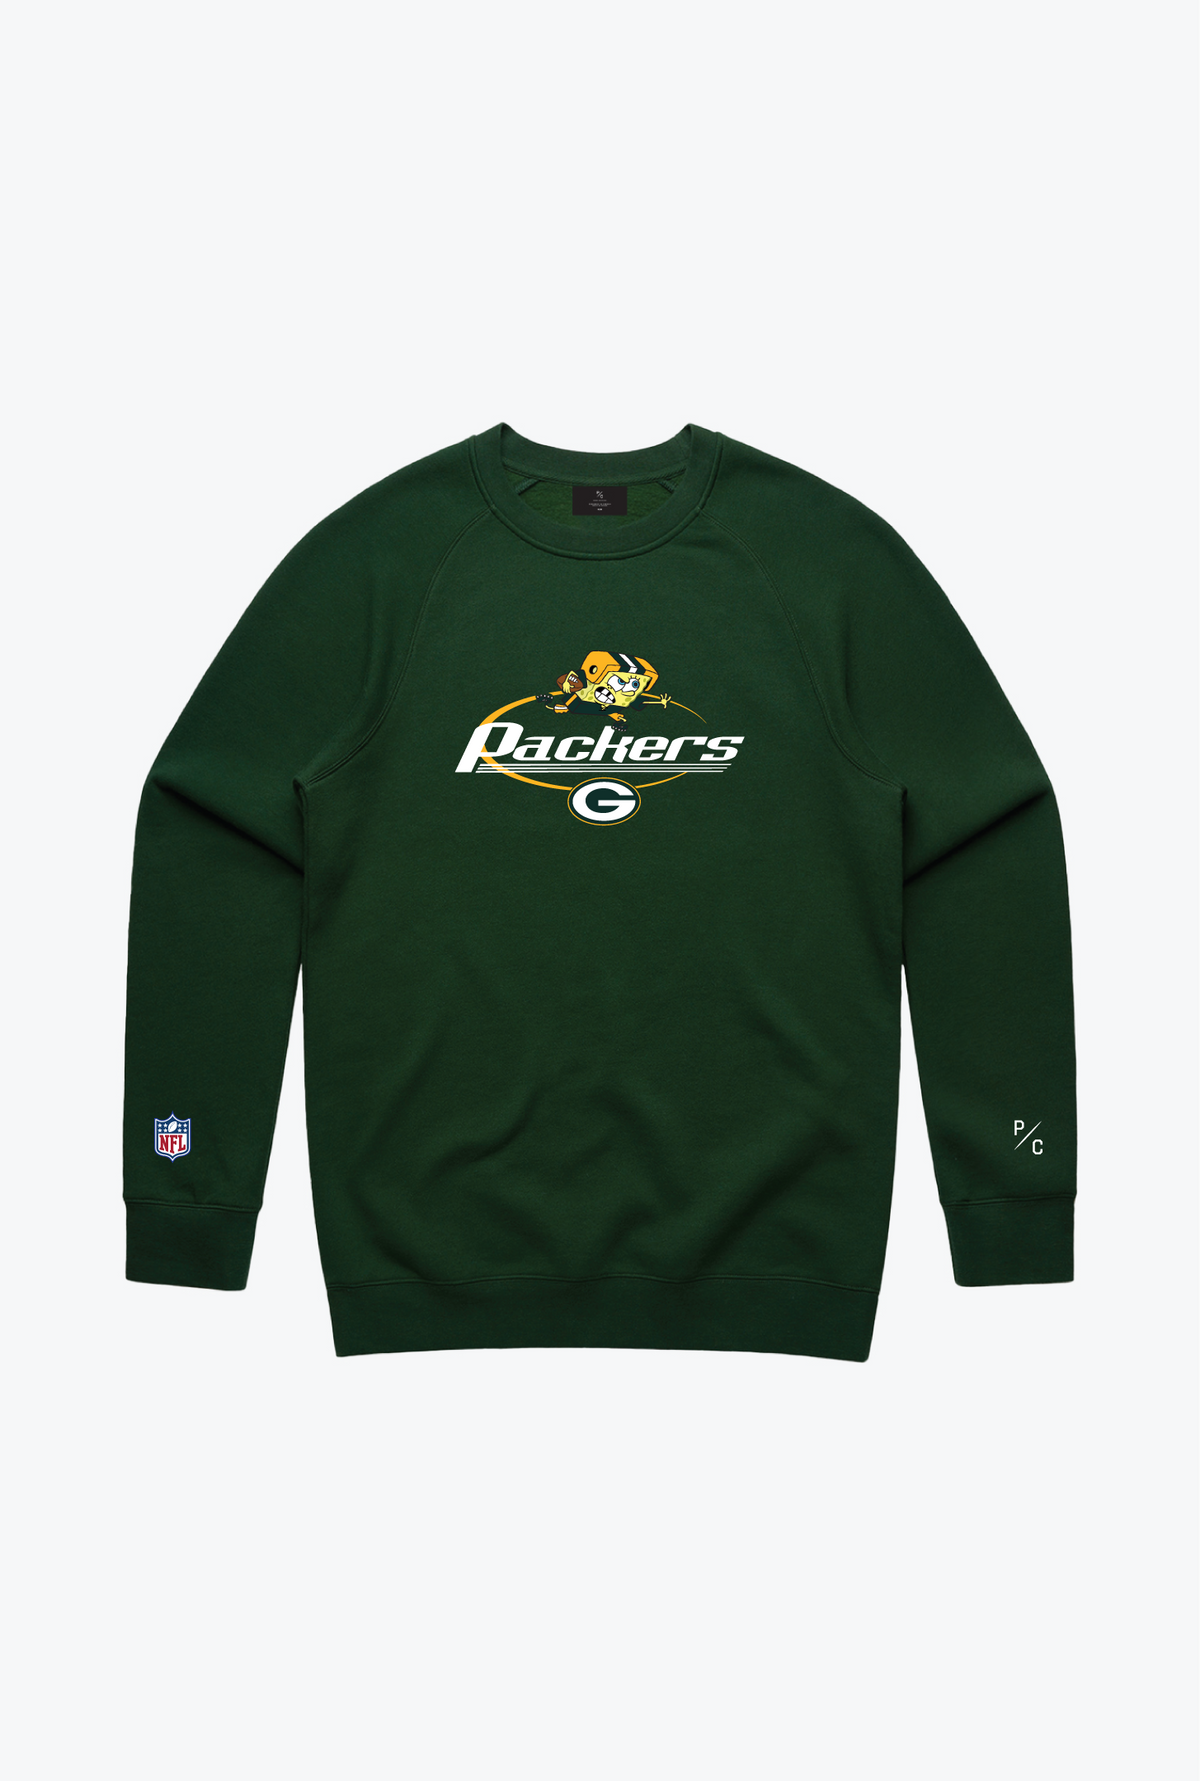 NFL x Nickelodeon Embroidered Crewneck - Green Bay Packers